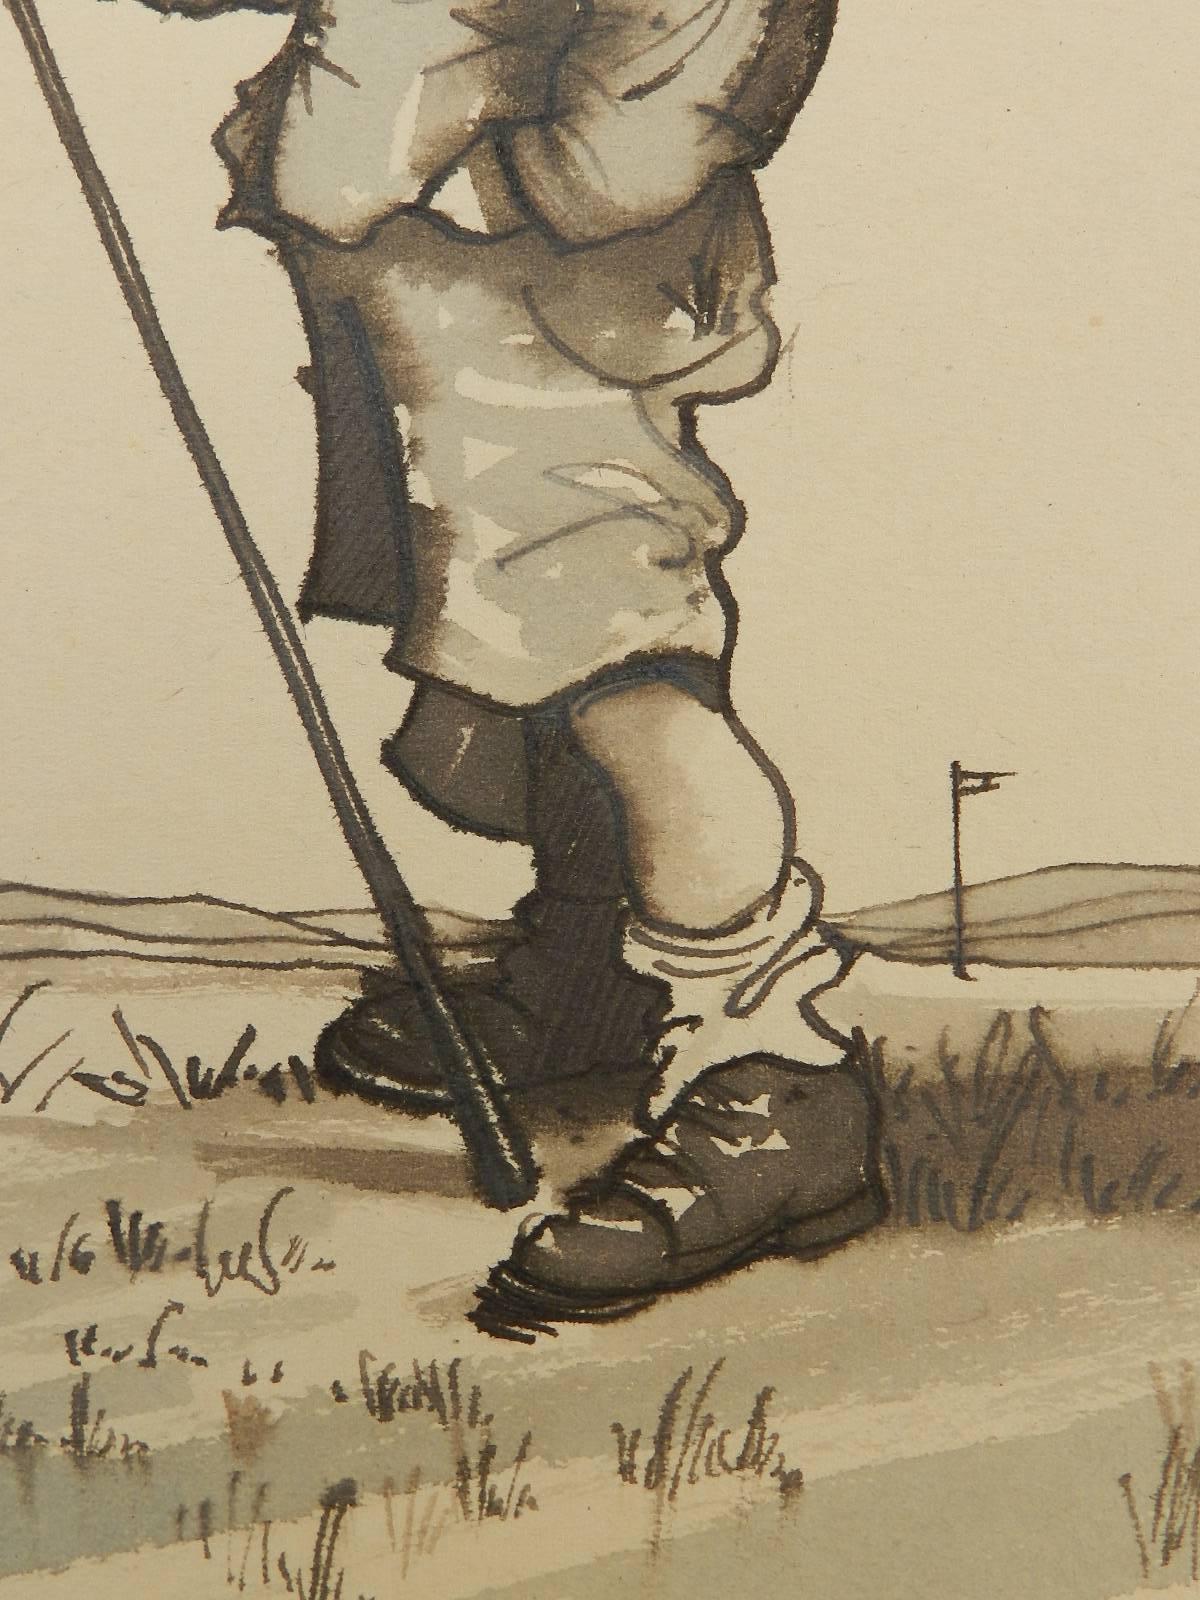 Amusing original sketch caricature of a Golfer
From a series of golf caricatures by the UK artist Peter Hobbs, 1930-1994.
Peter Hobbs was a professional sports caricaturist
A Young Boy playing golf
Pen and ink / watercolour painting on thin artists